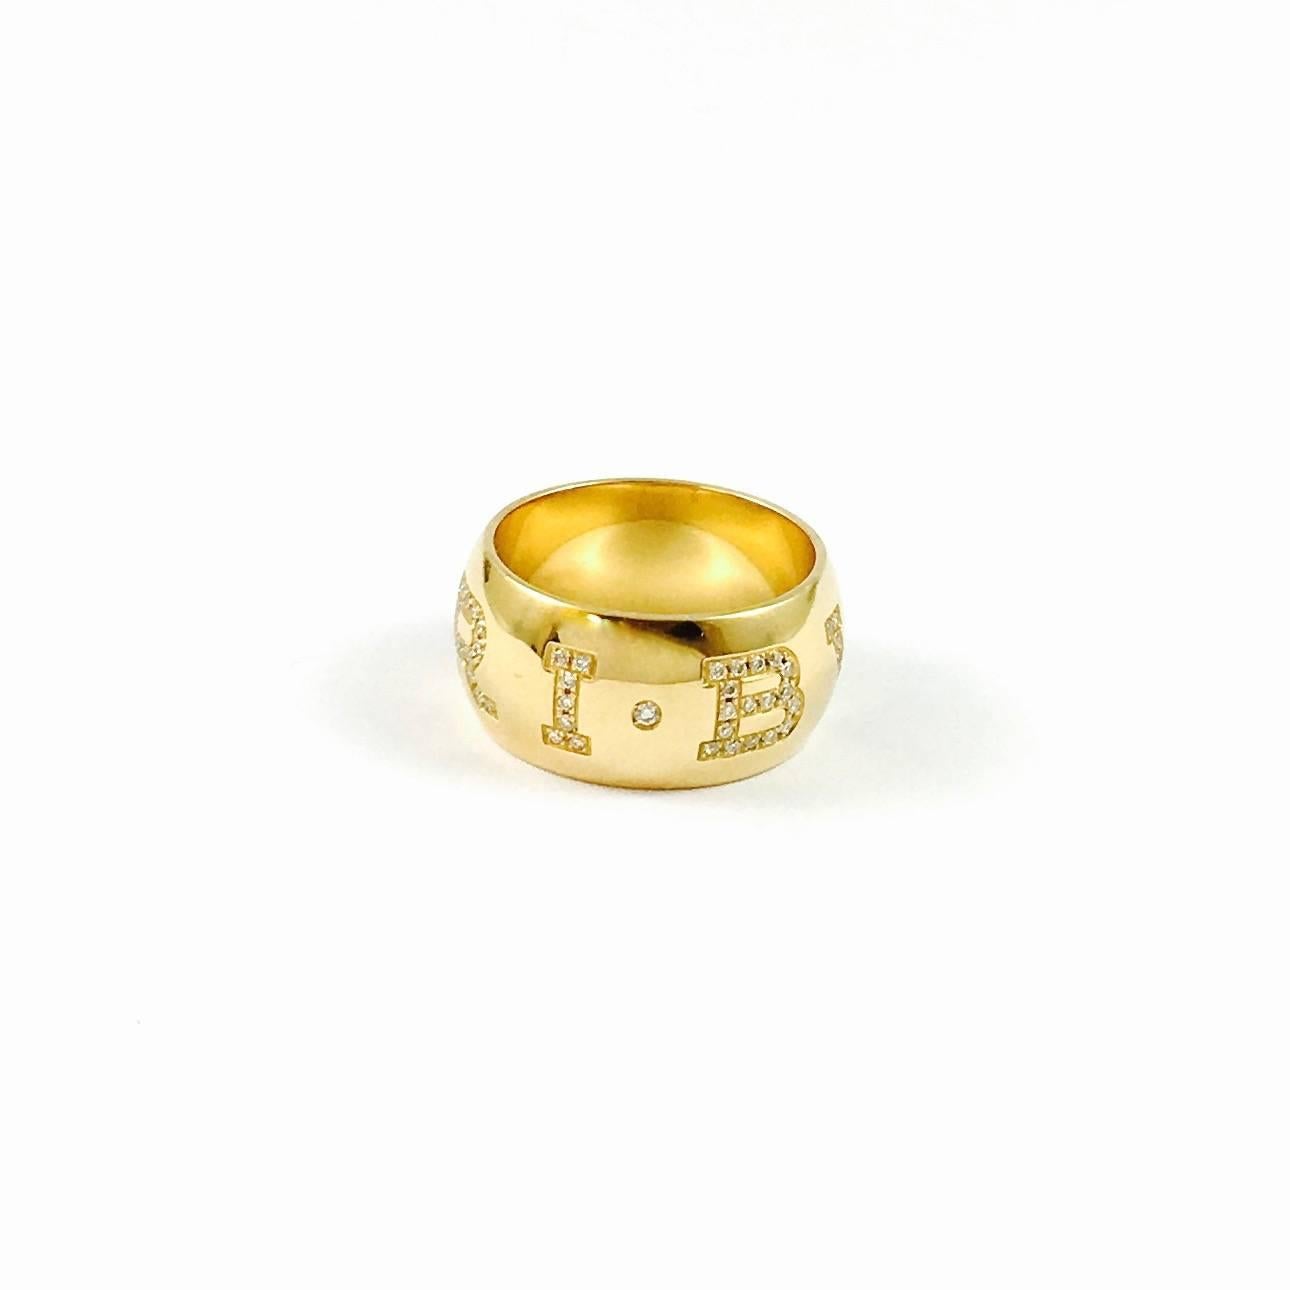 Bvlgari Monologo ring, featuring pave' set diamonds to spell out the Bvlgari signature around the ring, made in 18k yellow gold. 
Width: 10 mm
Weight: 13.4 grams
Size: 54  US  approx. 6.5  (This band fits approximately two European sizes tighter